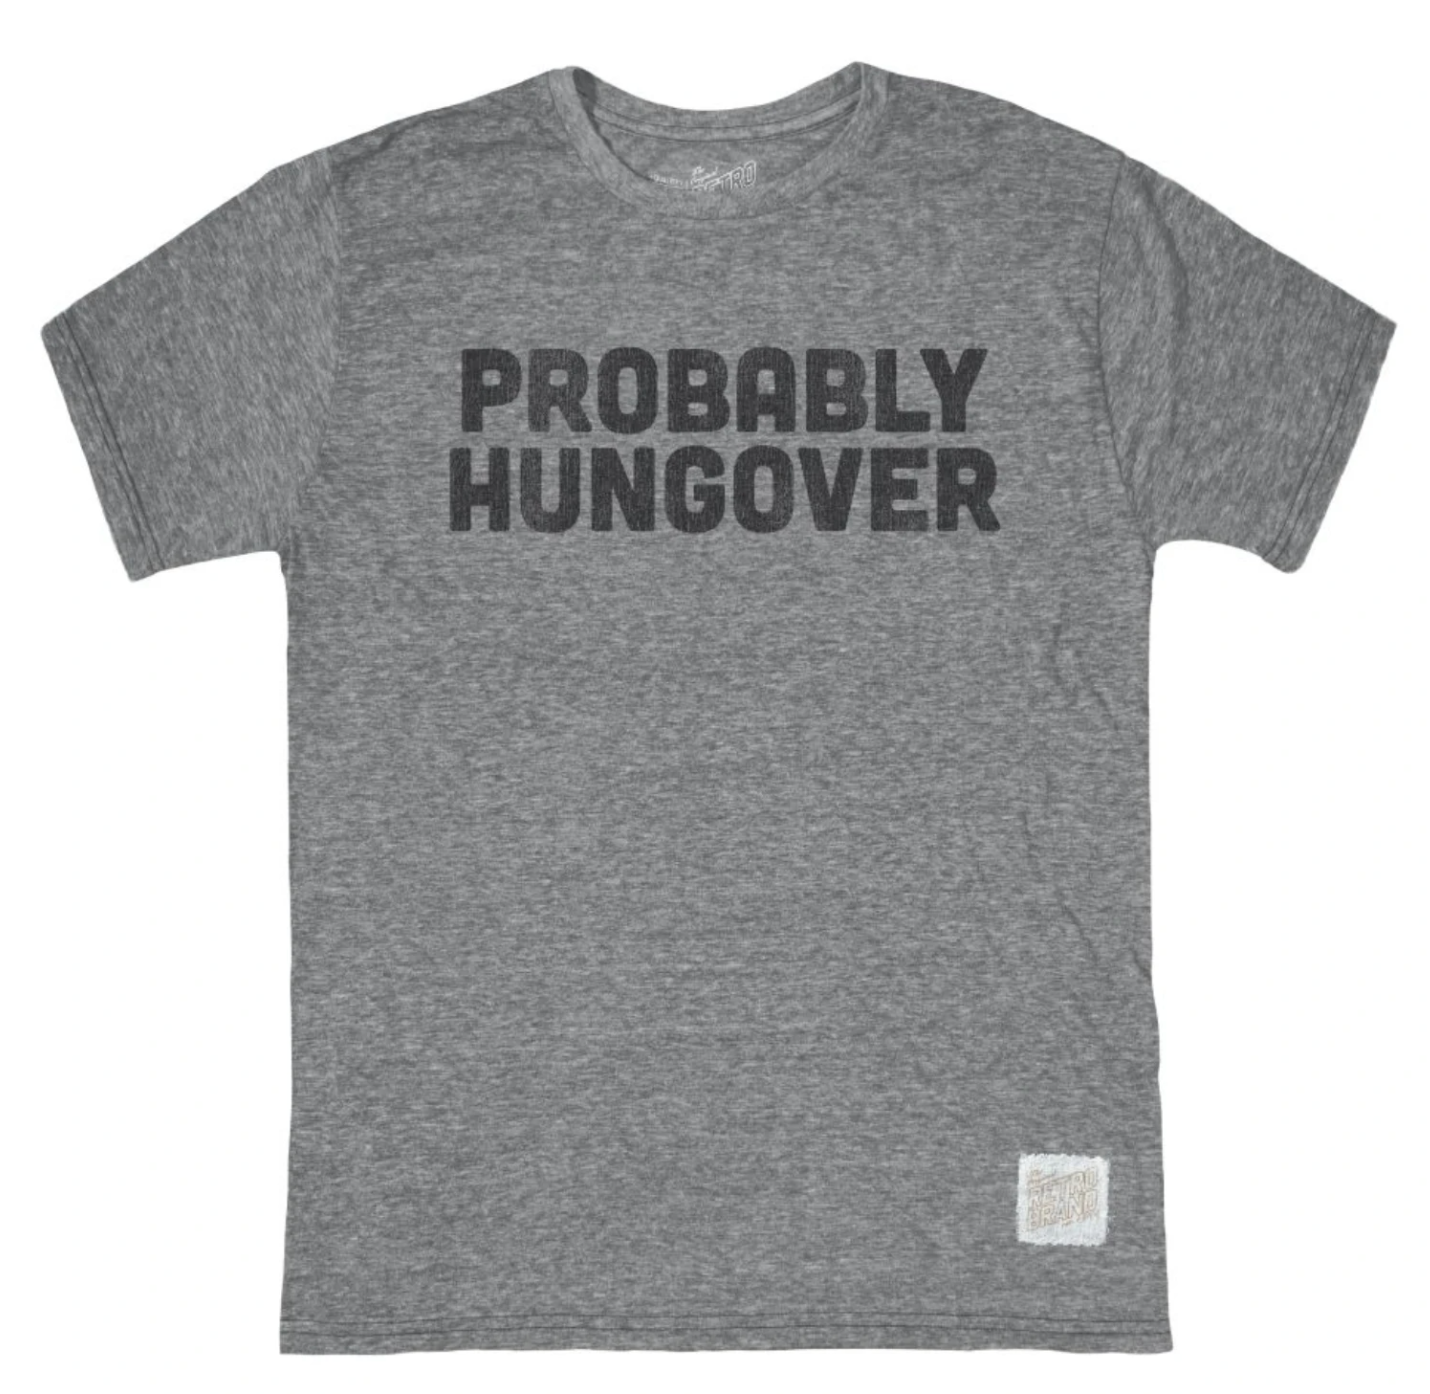 Probably Hungover Tri-Blend Unisex Tee